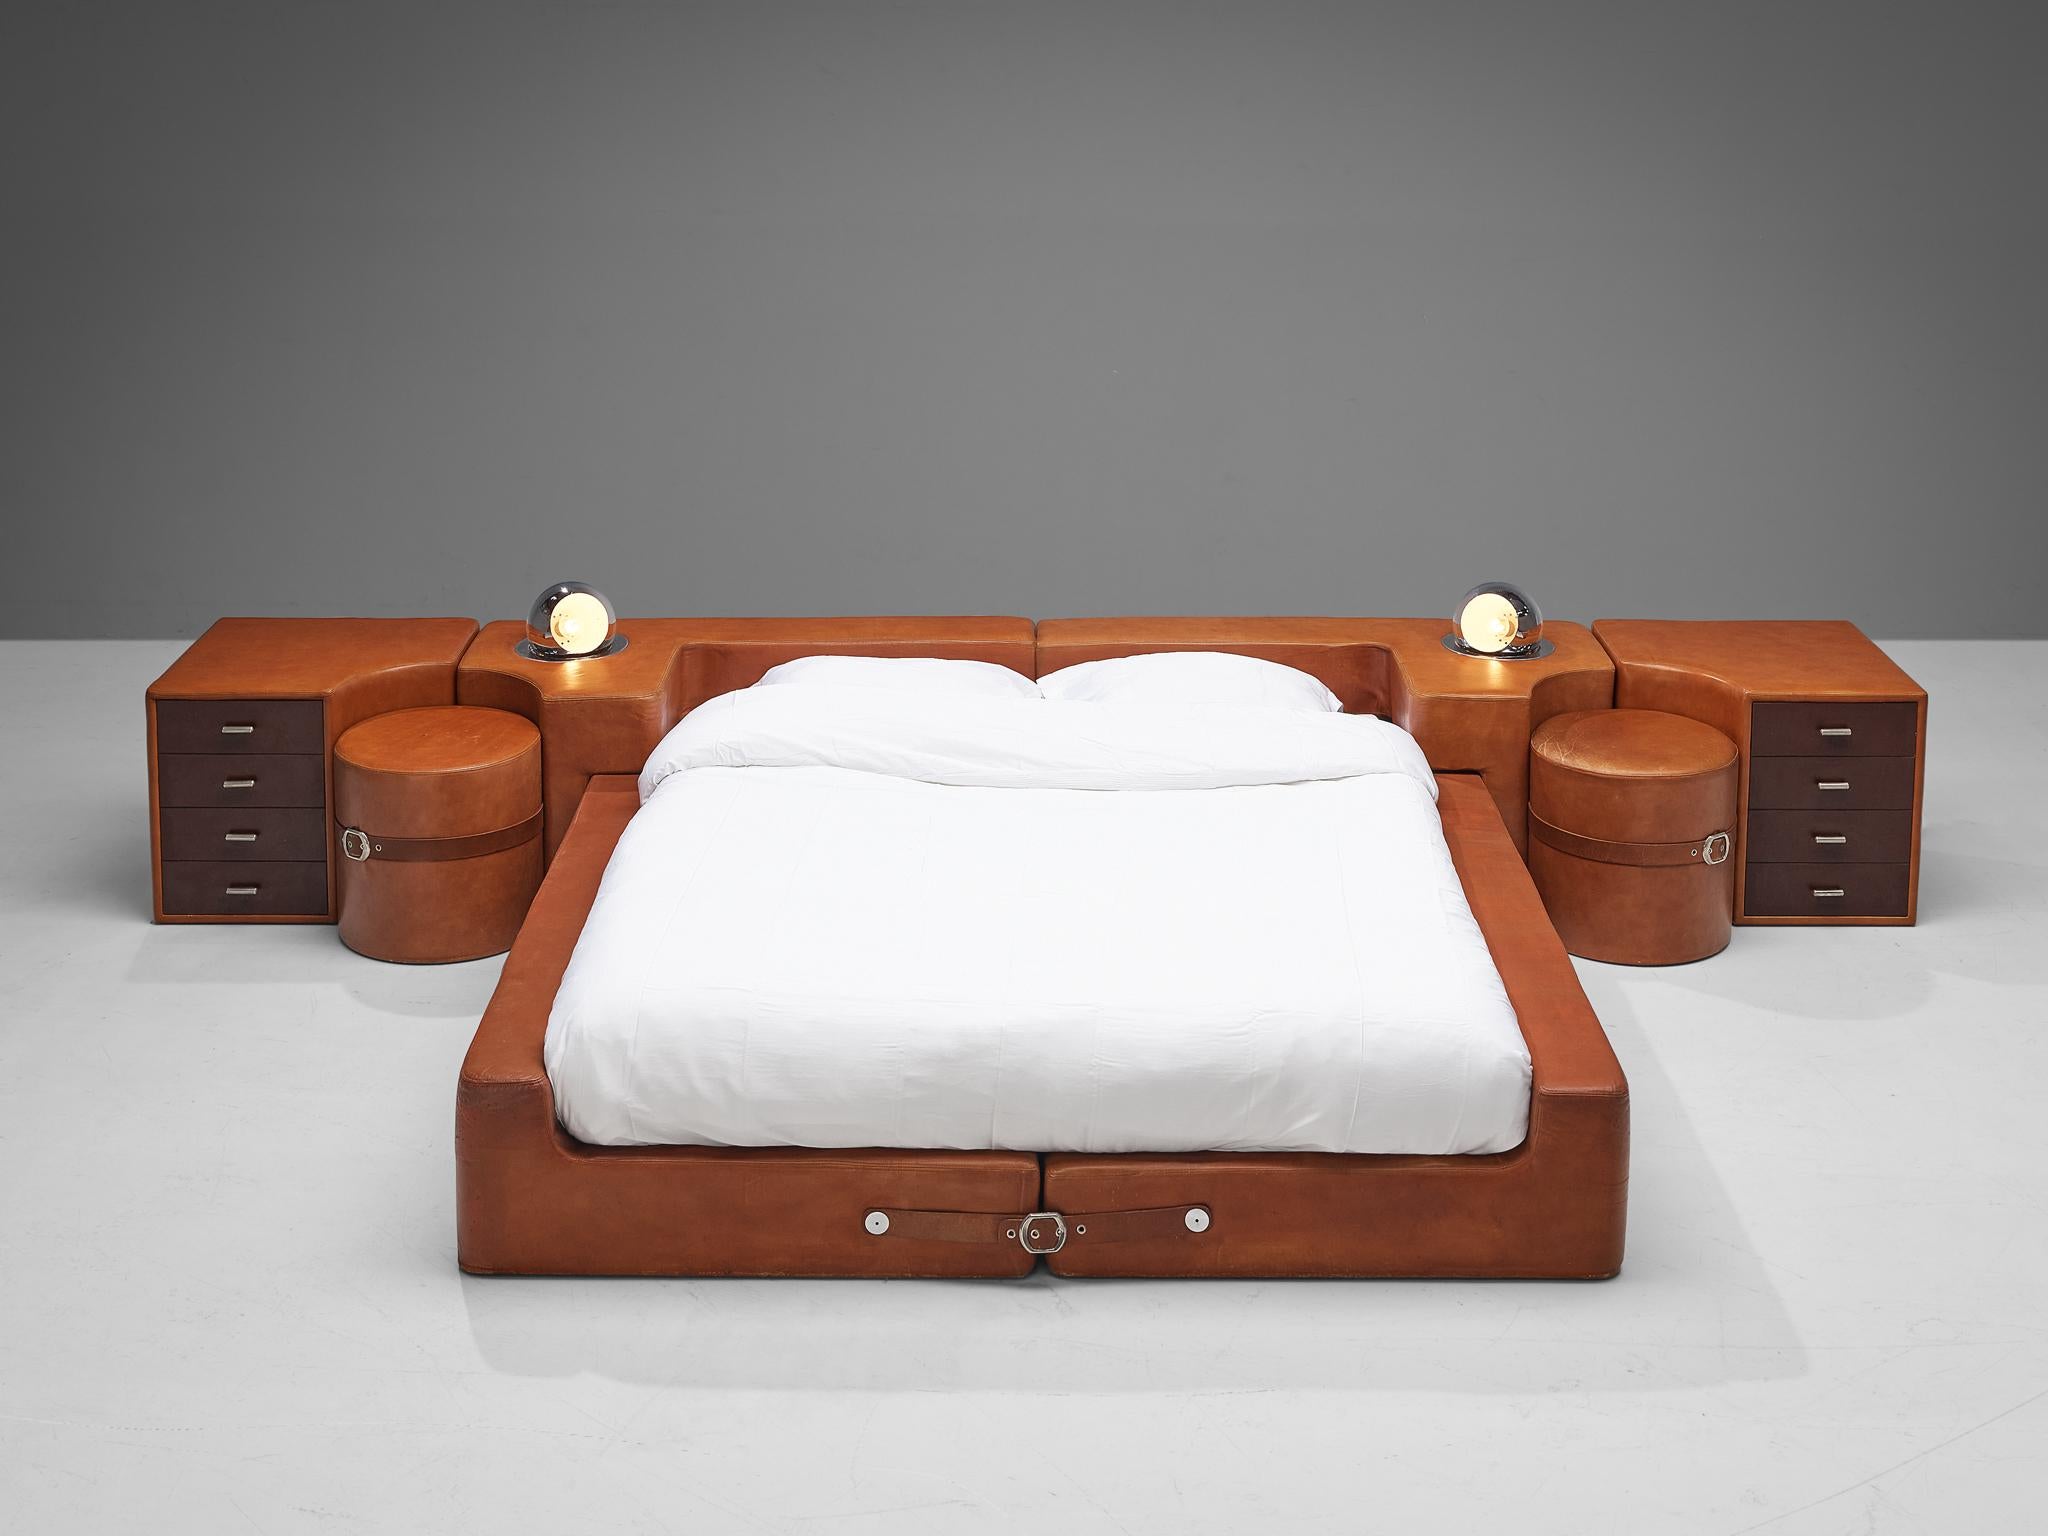 Guido Faleschini for Mariani, ‘Pace Collection’ set of queen bed, two nightstands and two stools, leather, chrome-plated brass, enameled steel, Italy, circa 1975 

This eccentric set of one bed, two nightstands equipped with four drawers and stools